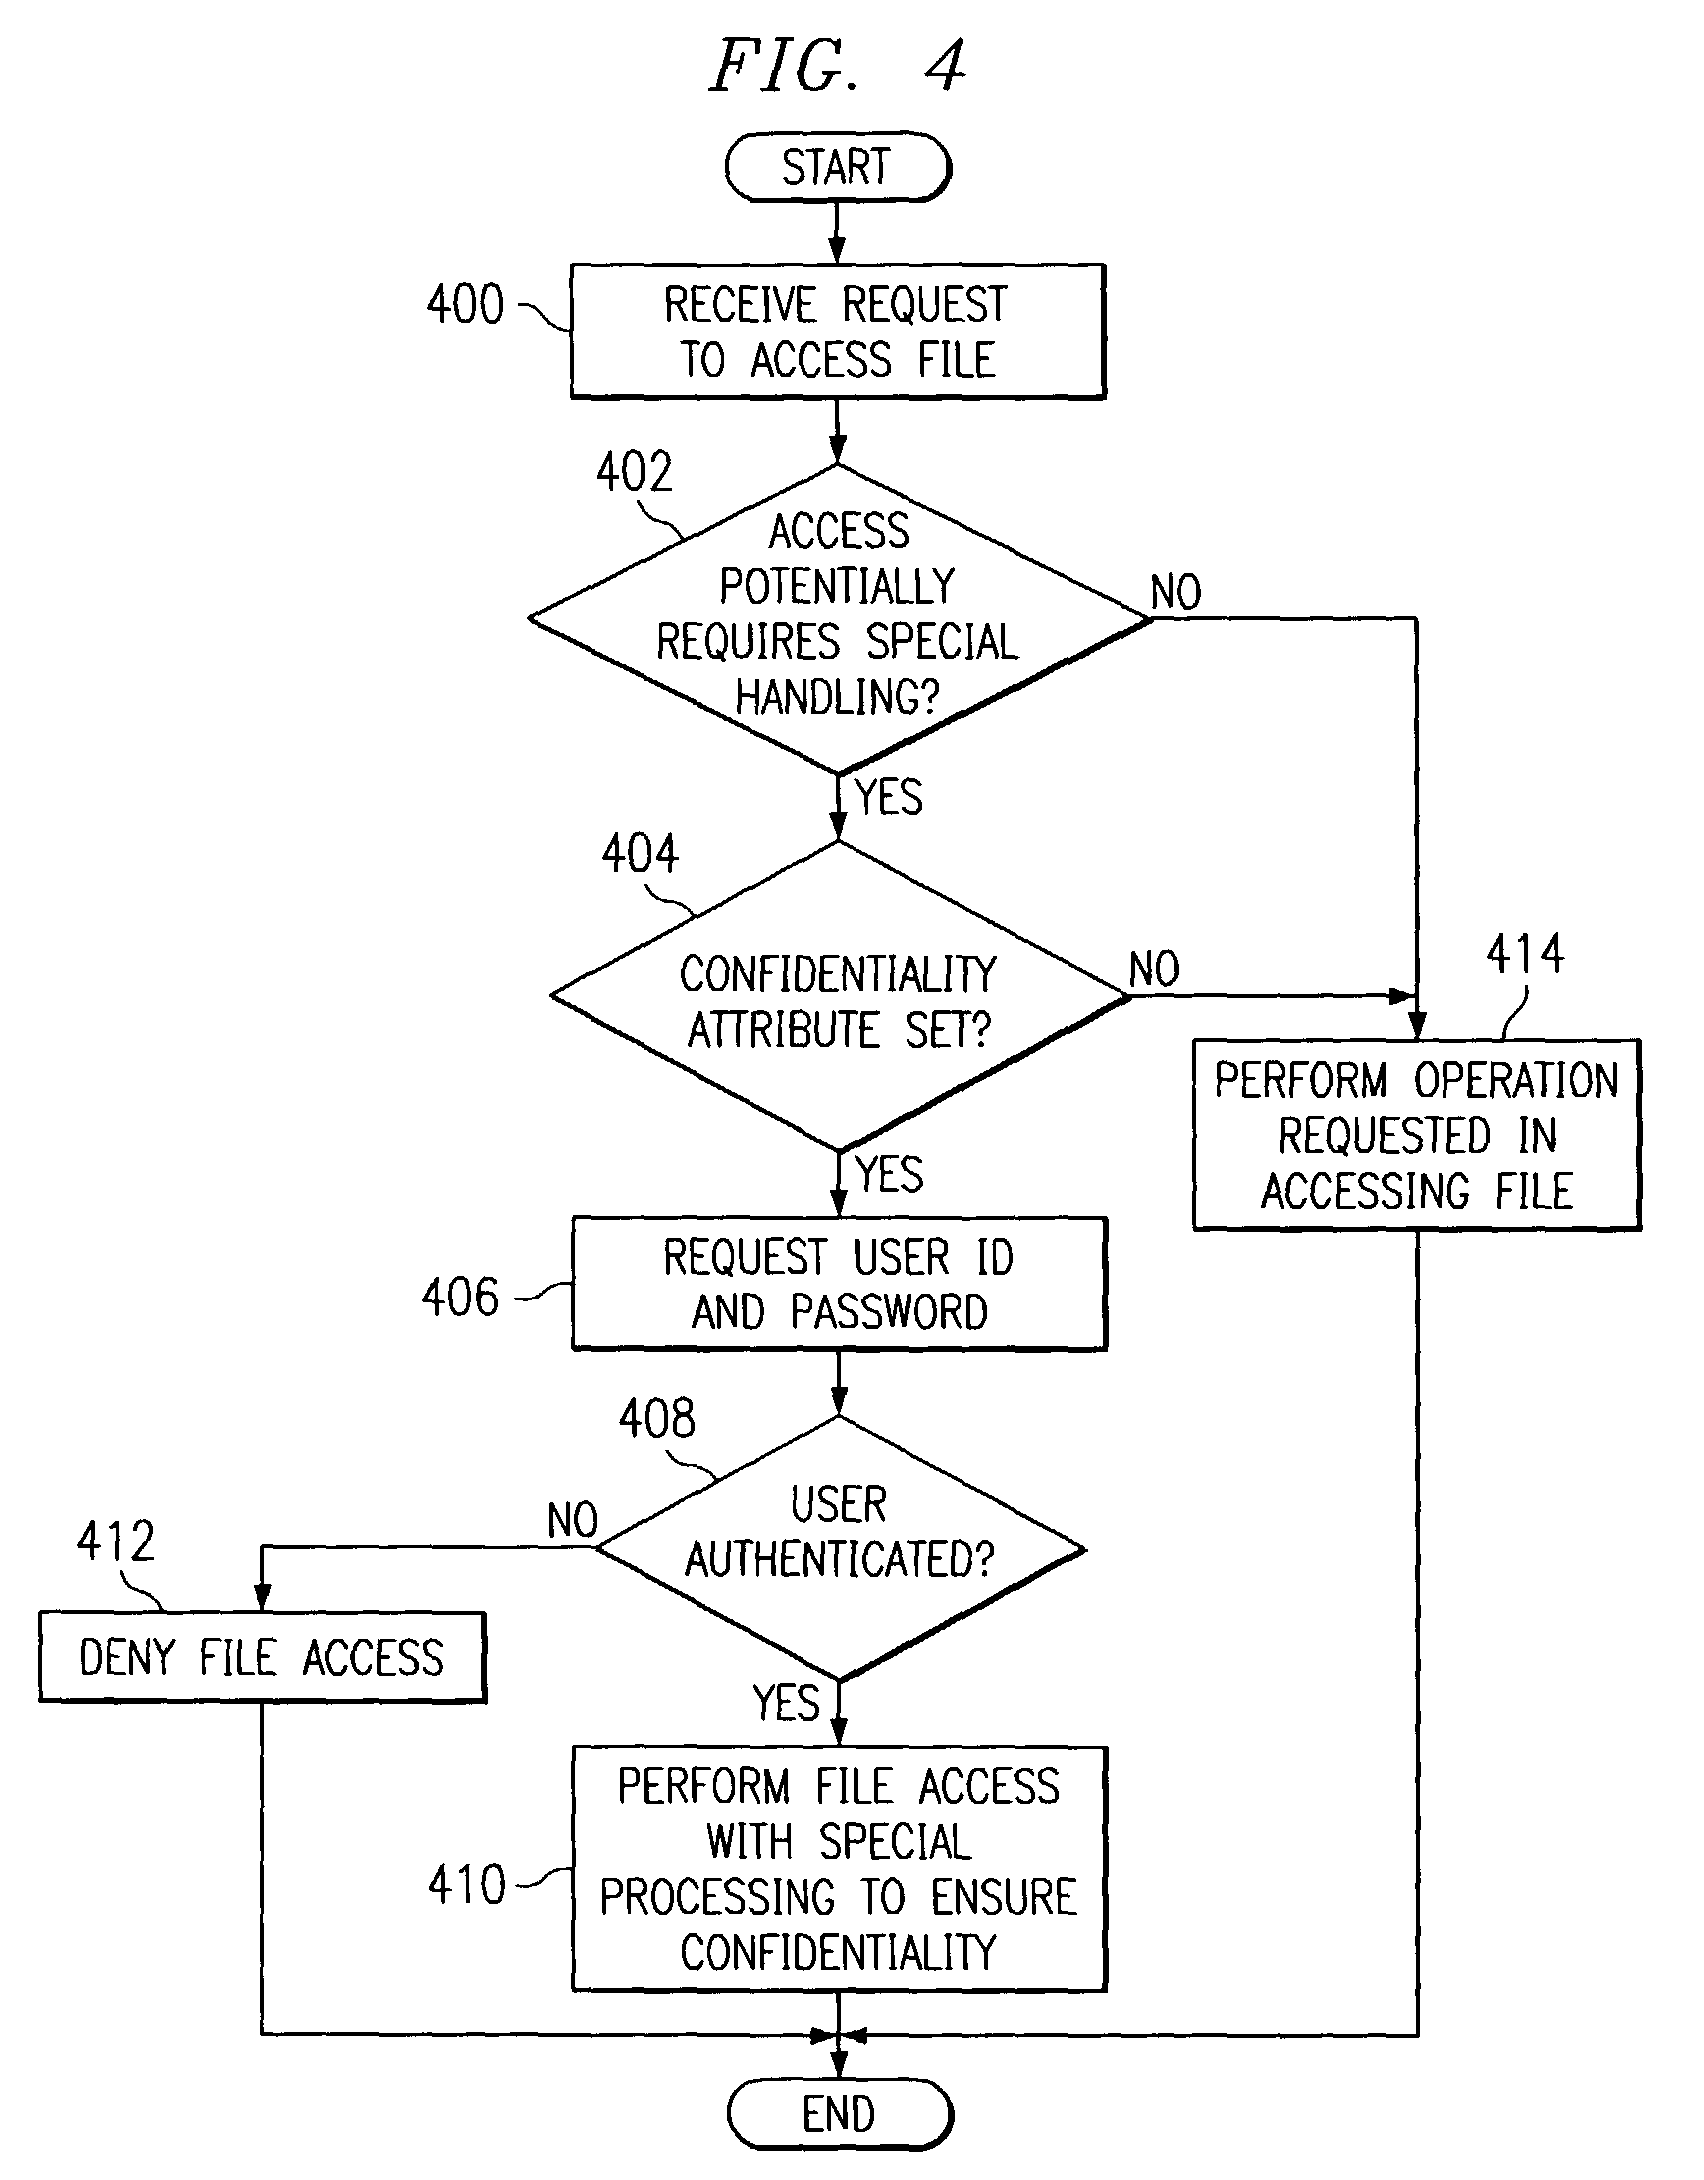 Method and apparatus for handling files containing confidential or sensitive information